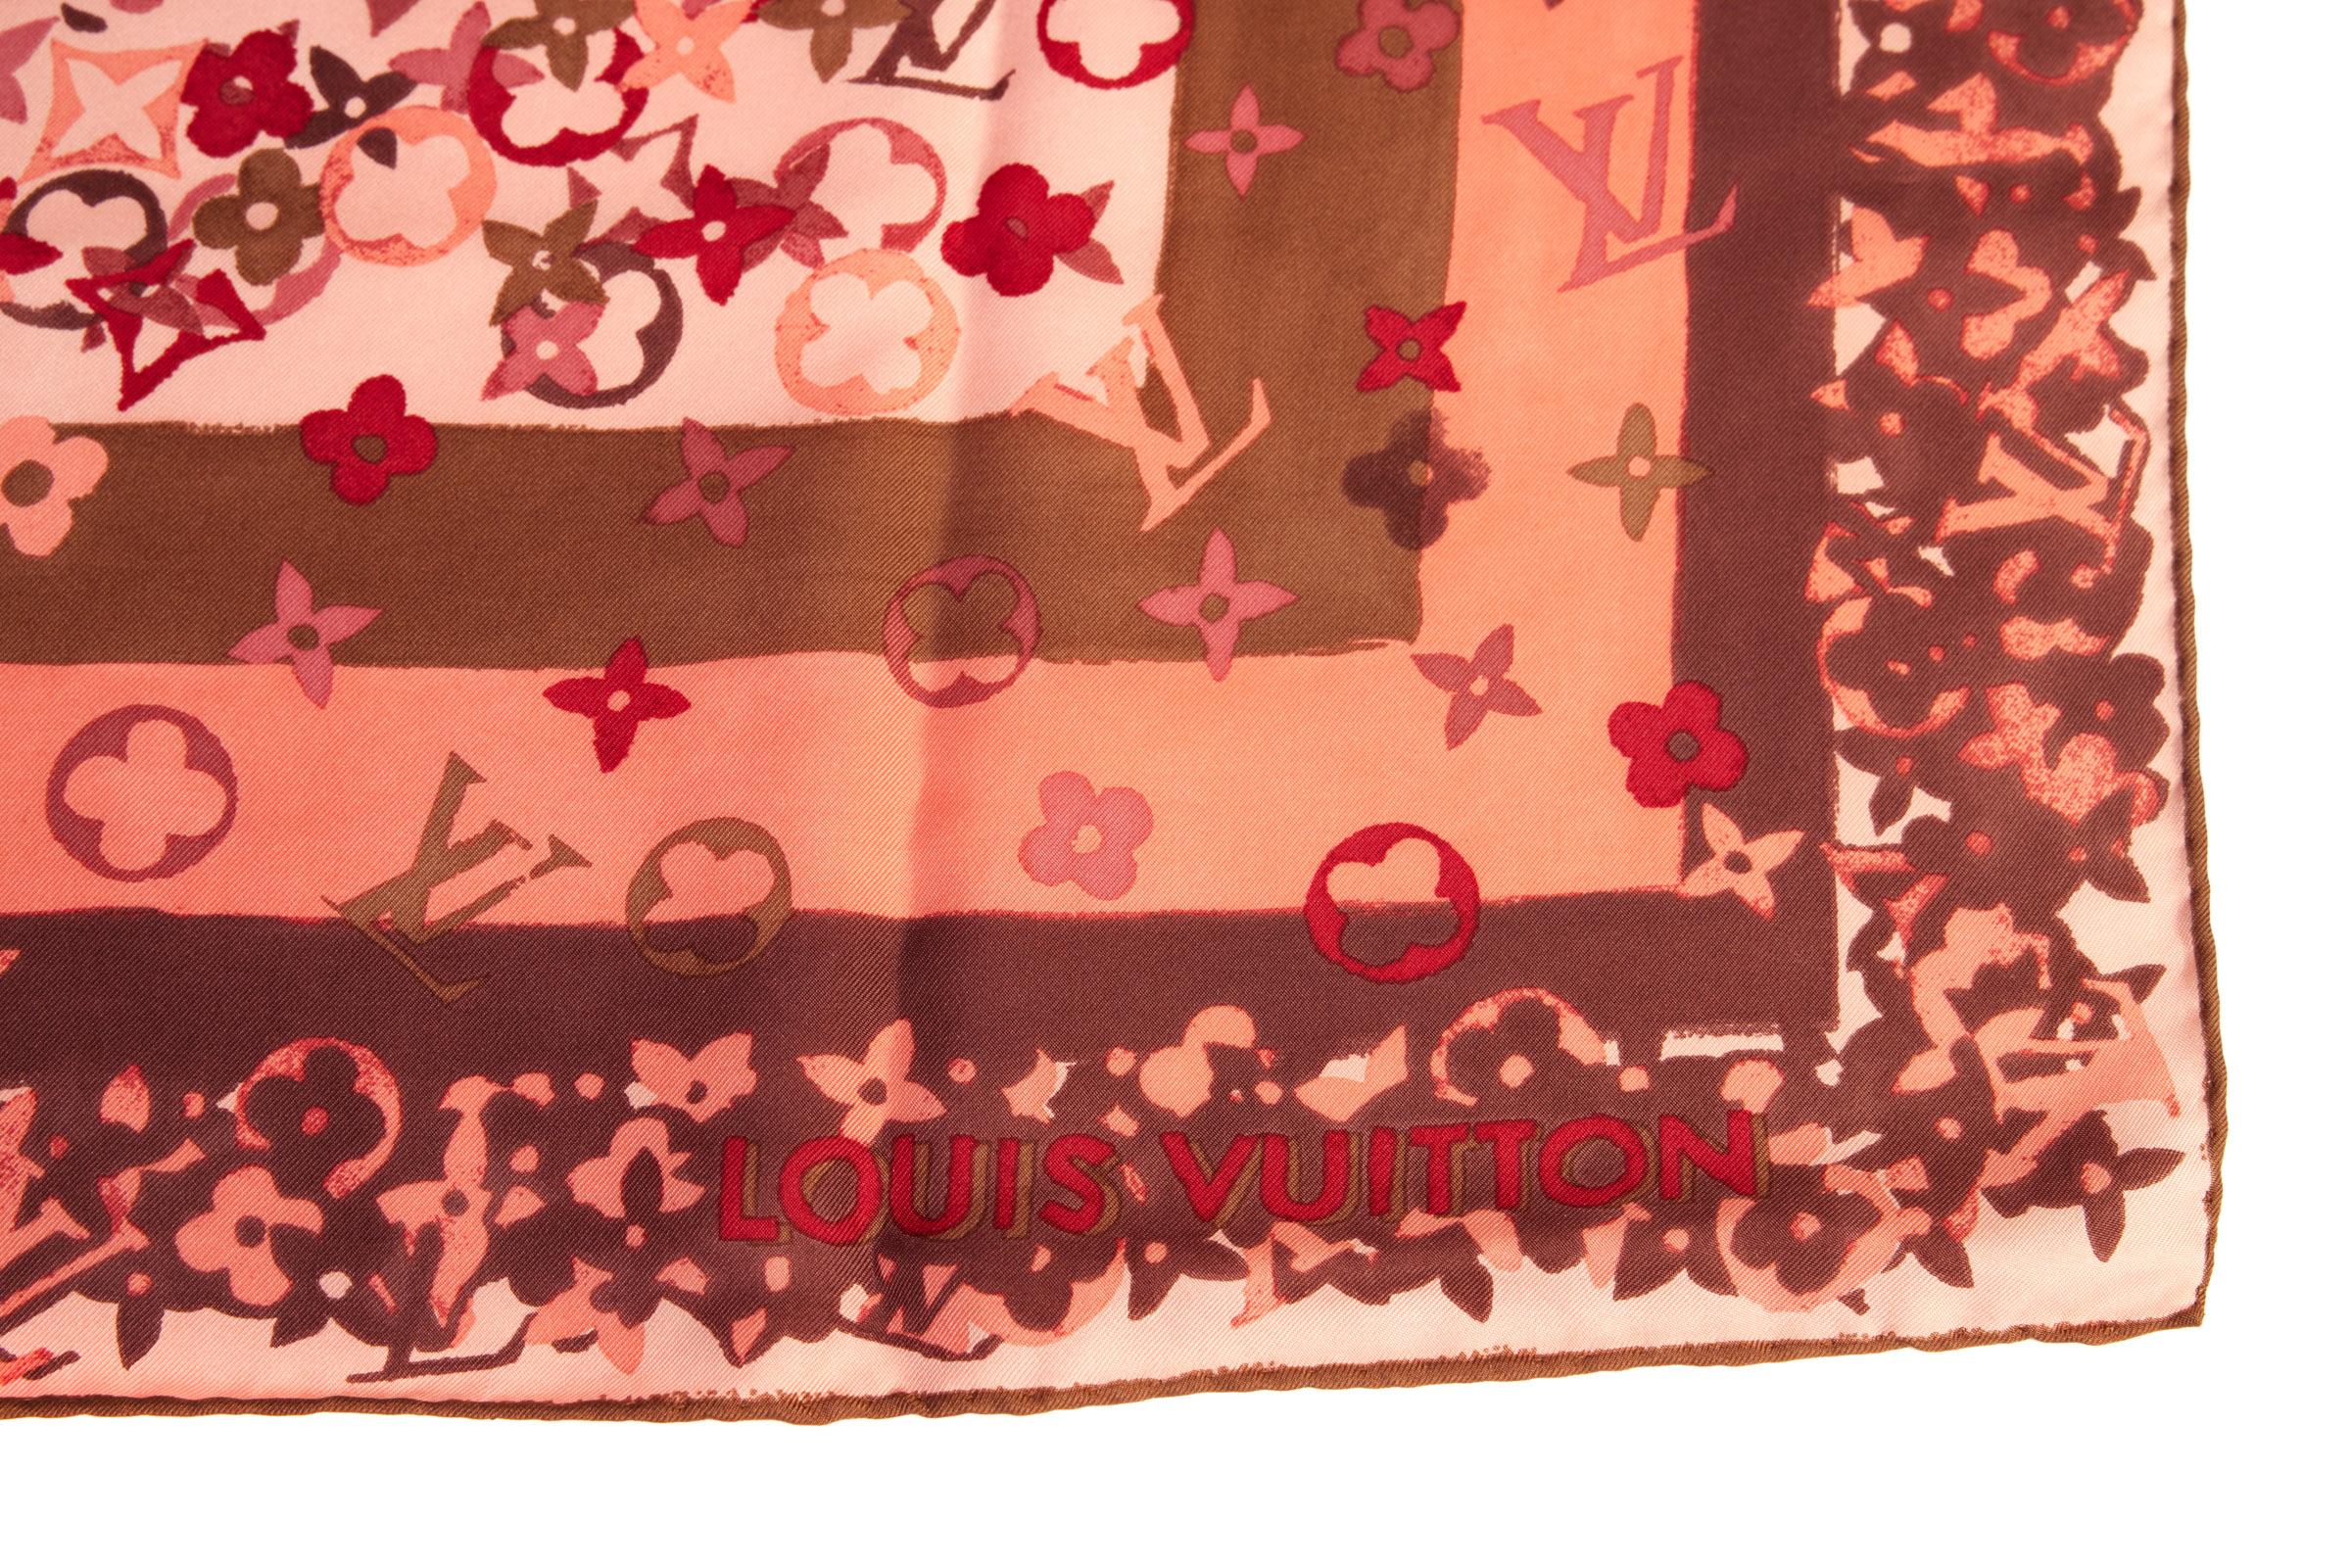 Louis Vuitton silk flower scarf in pink and brown. Hand rolled edges. Care tag.